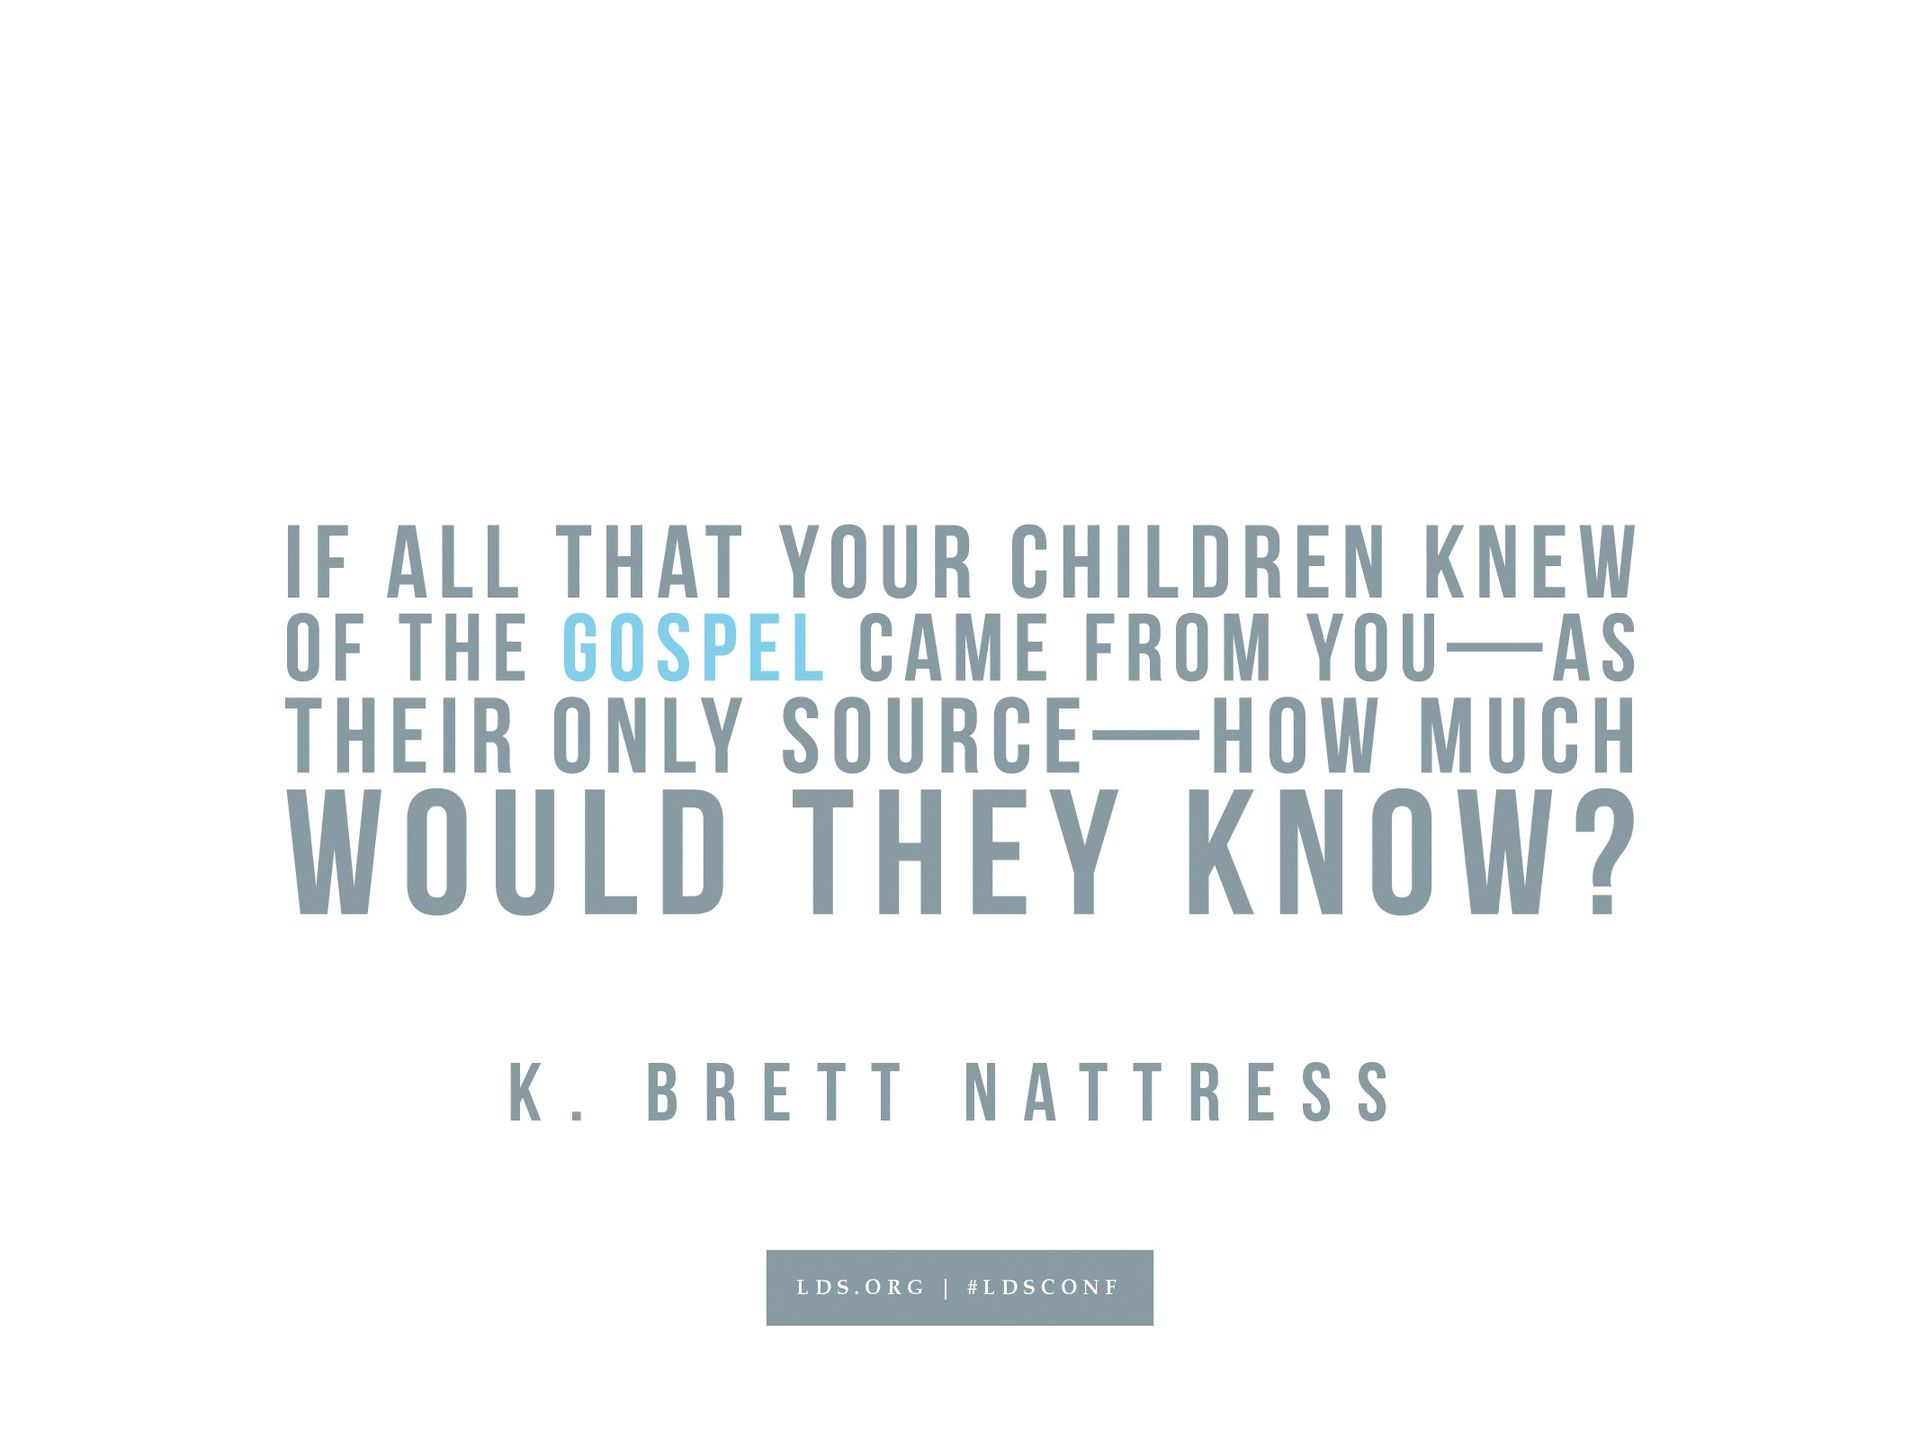 “If all that your children knew of the gospel came from you—as their only source—how much would they know?”—K. Brett Nattress, “No Greater Joy Than to Know That They Know”